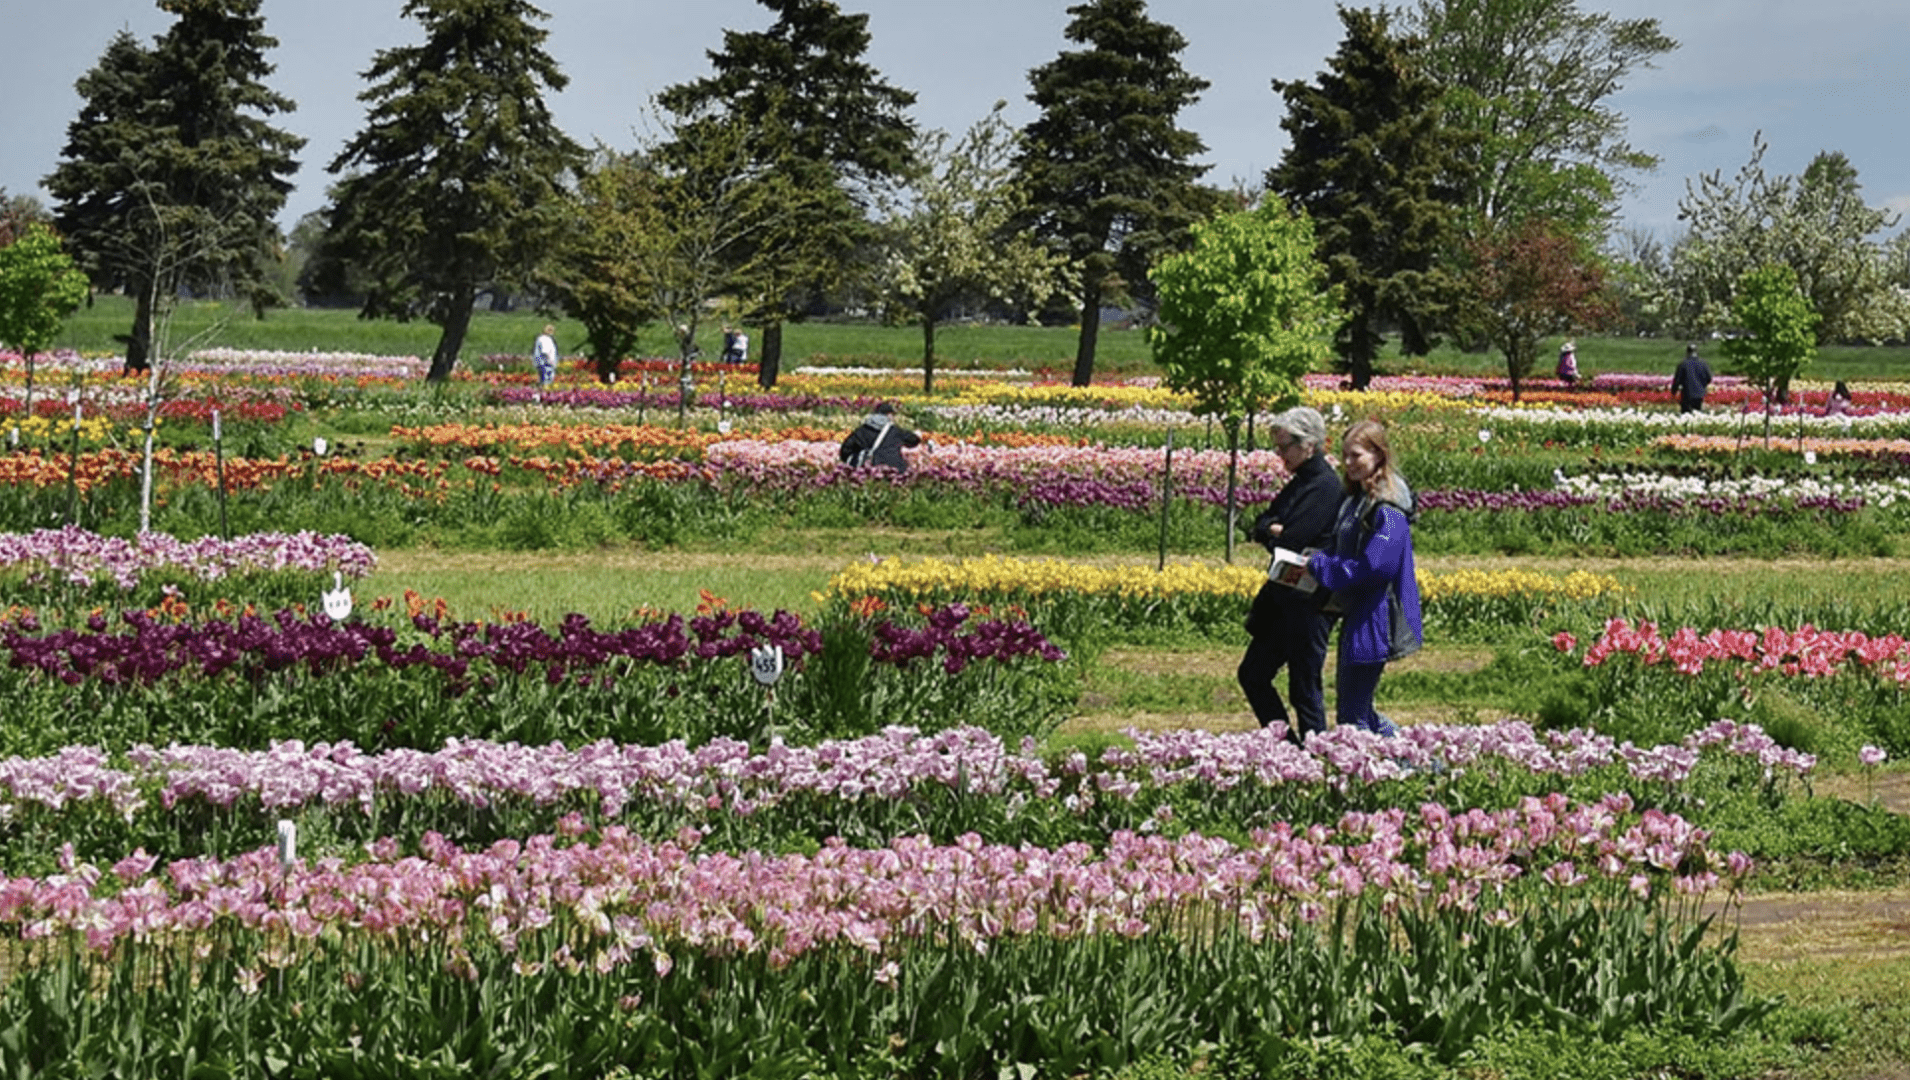 People walking though a Tulip garden in an array of different colors